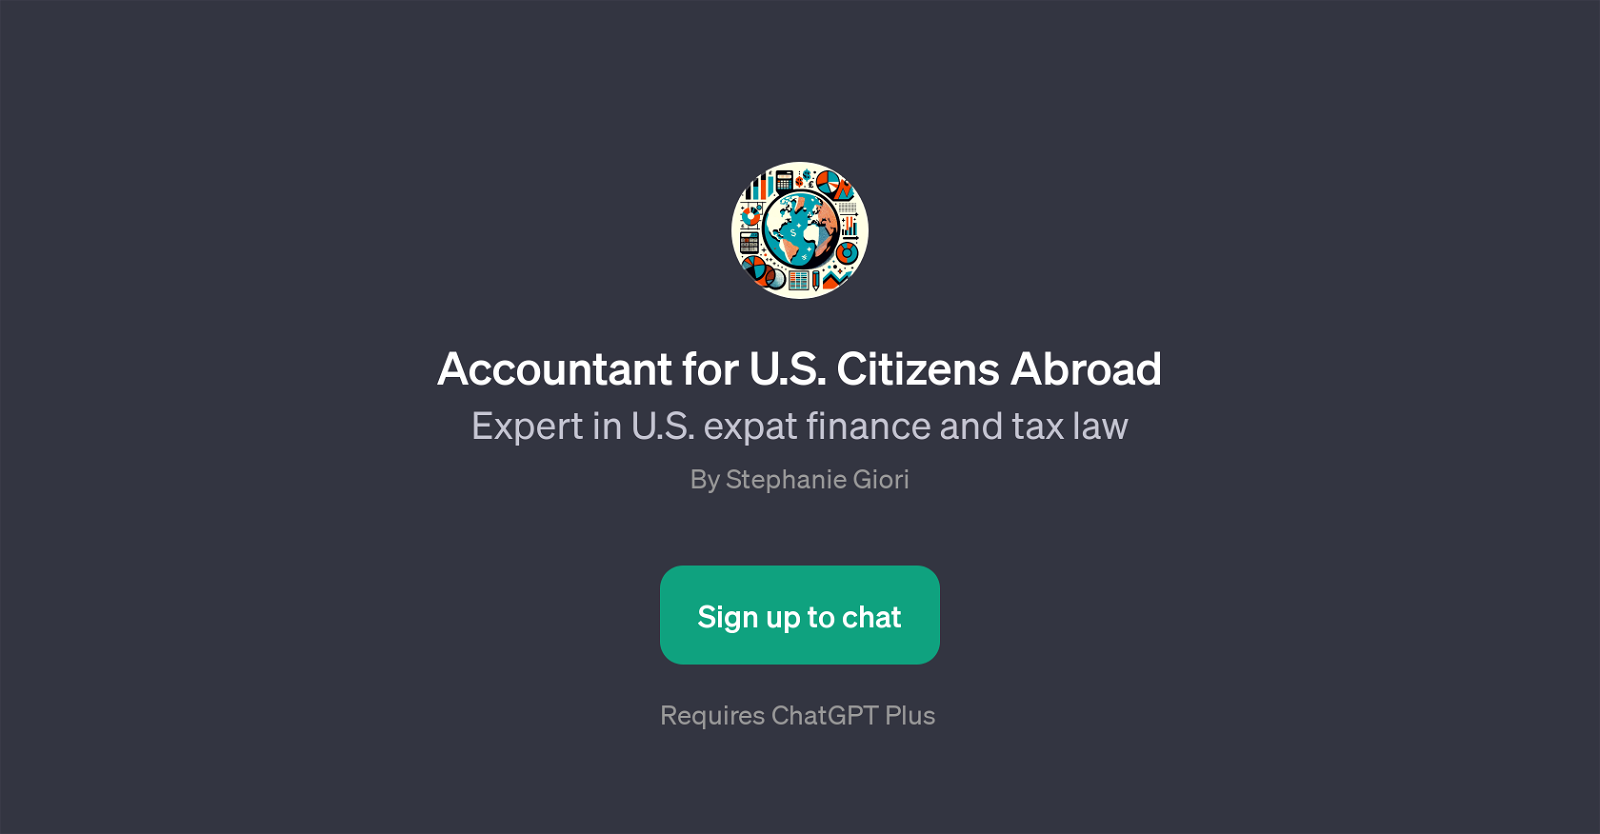 Accountant for U.S. Citizens Abroad website